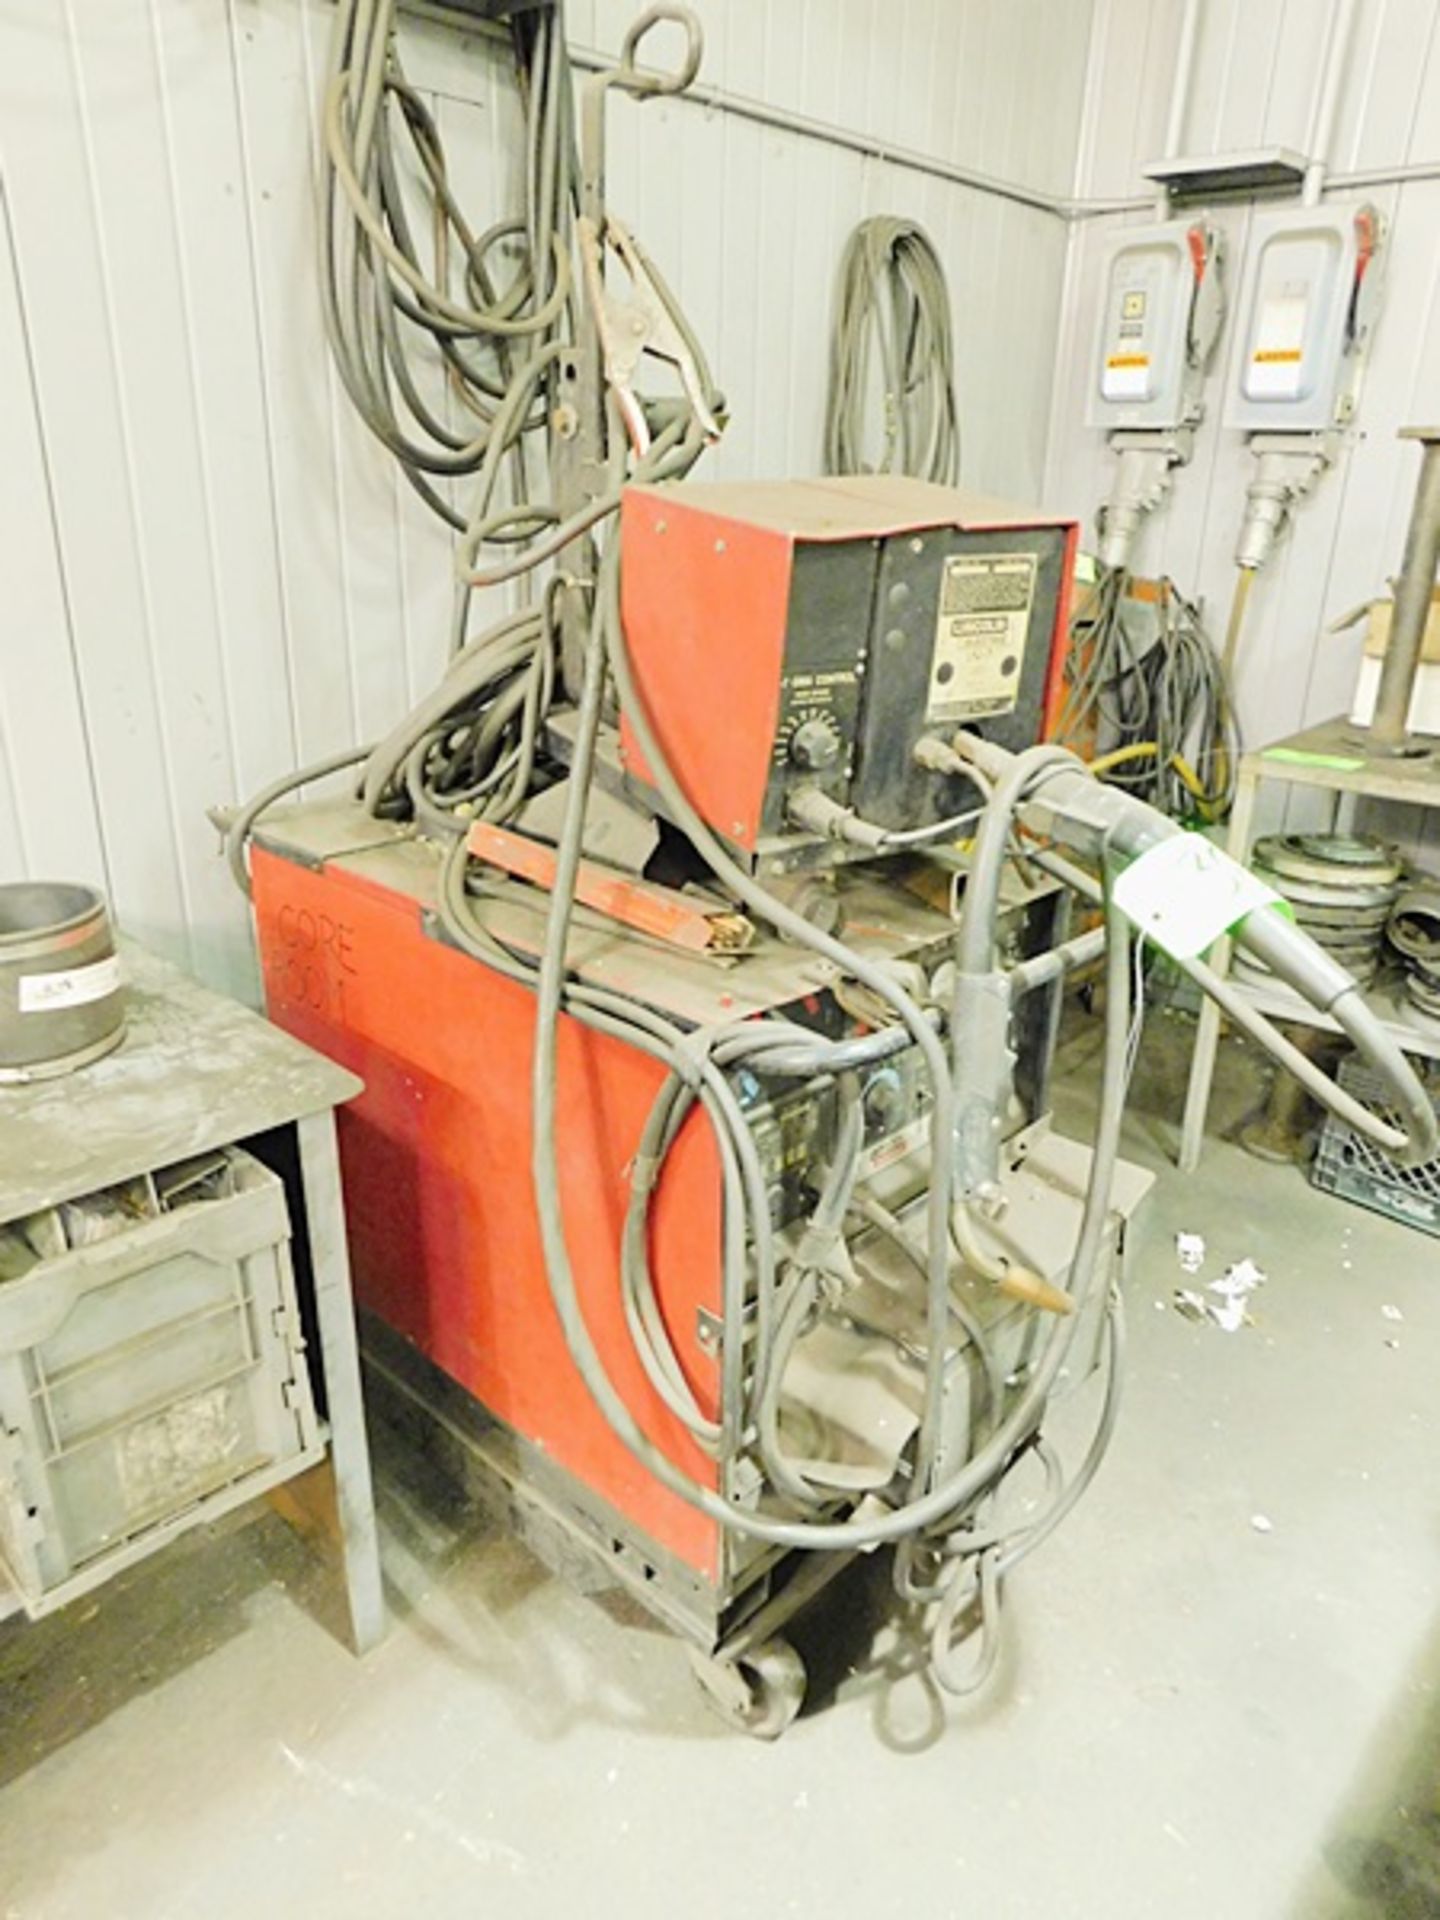 Lincoln DC-400 Mig Welder with LN-7 Wire Feed